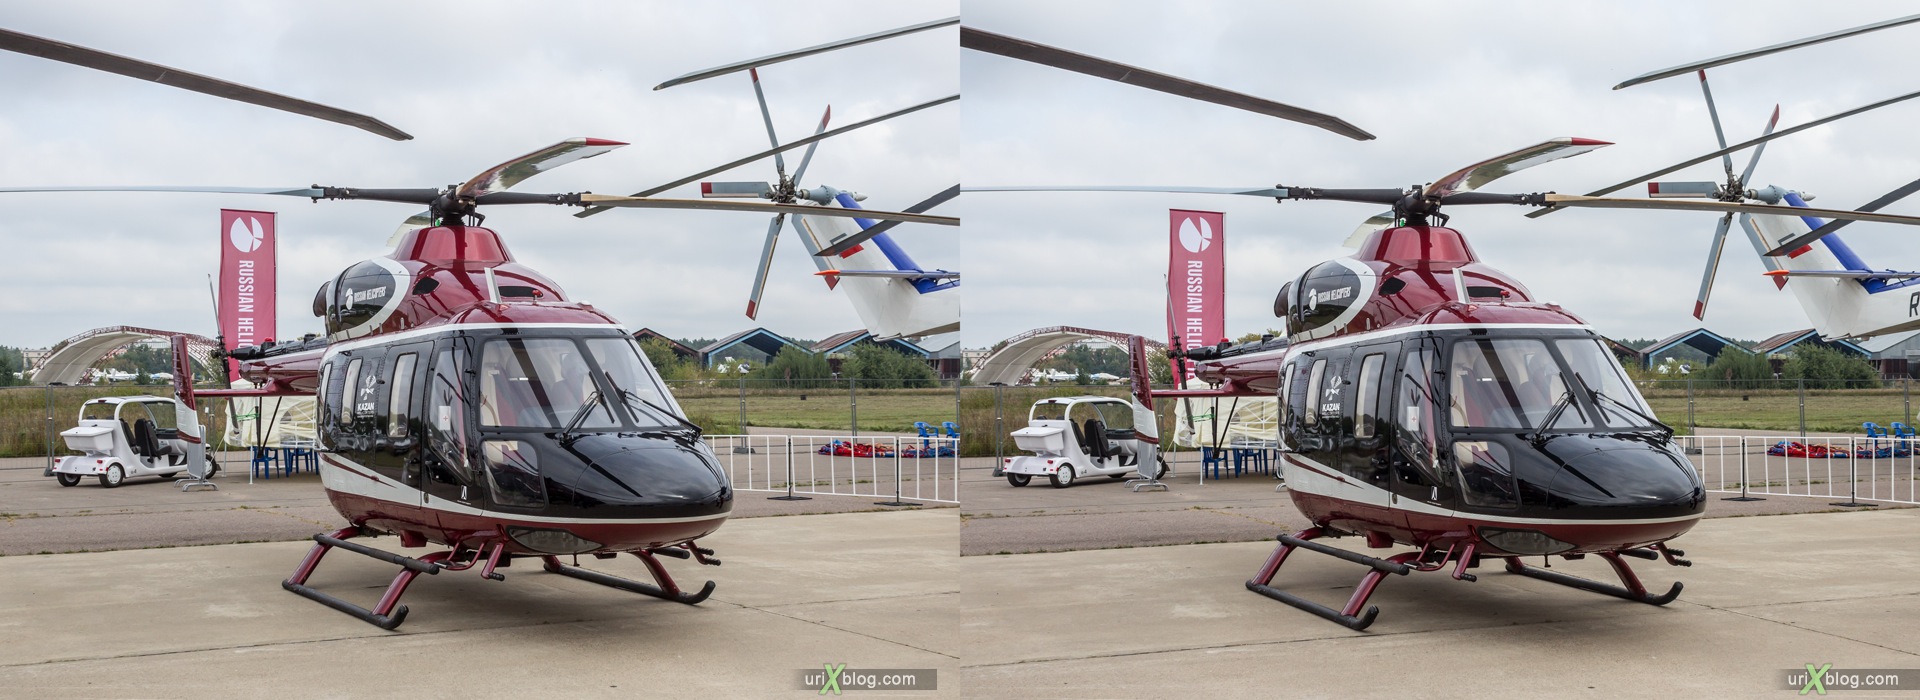 2013, MAKS, International Aviation and Space Salon, Russia, Ramenskoye airfield, Ansat, helicopter, 3D, stereo pair, cross-eyed, crossview, cross view stereo pair, stereoscopic